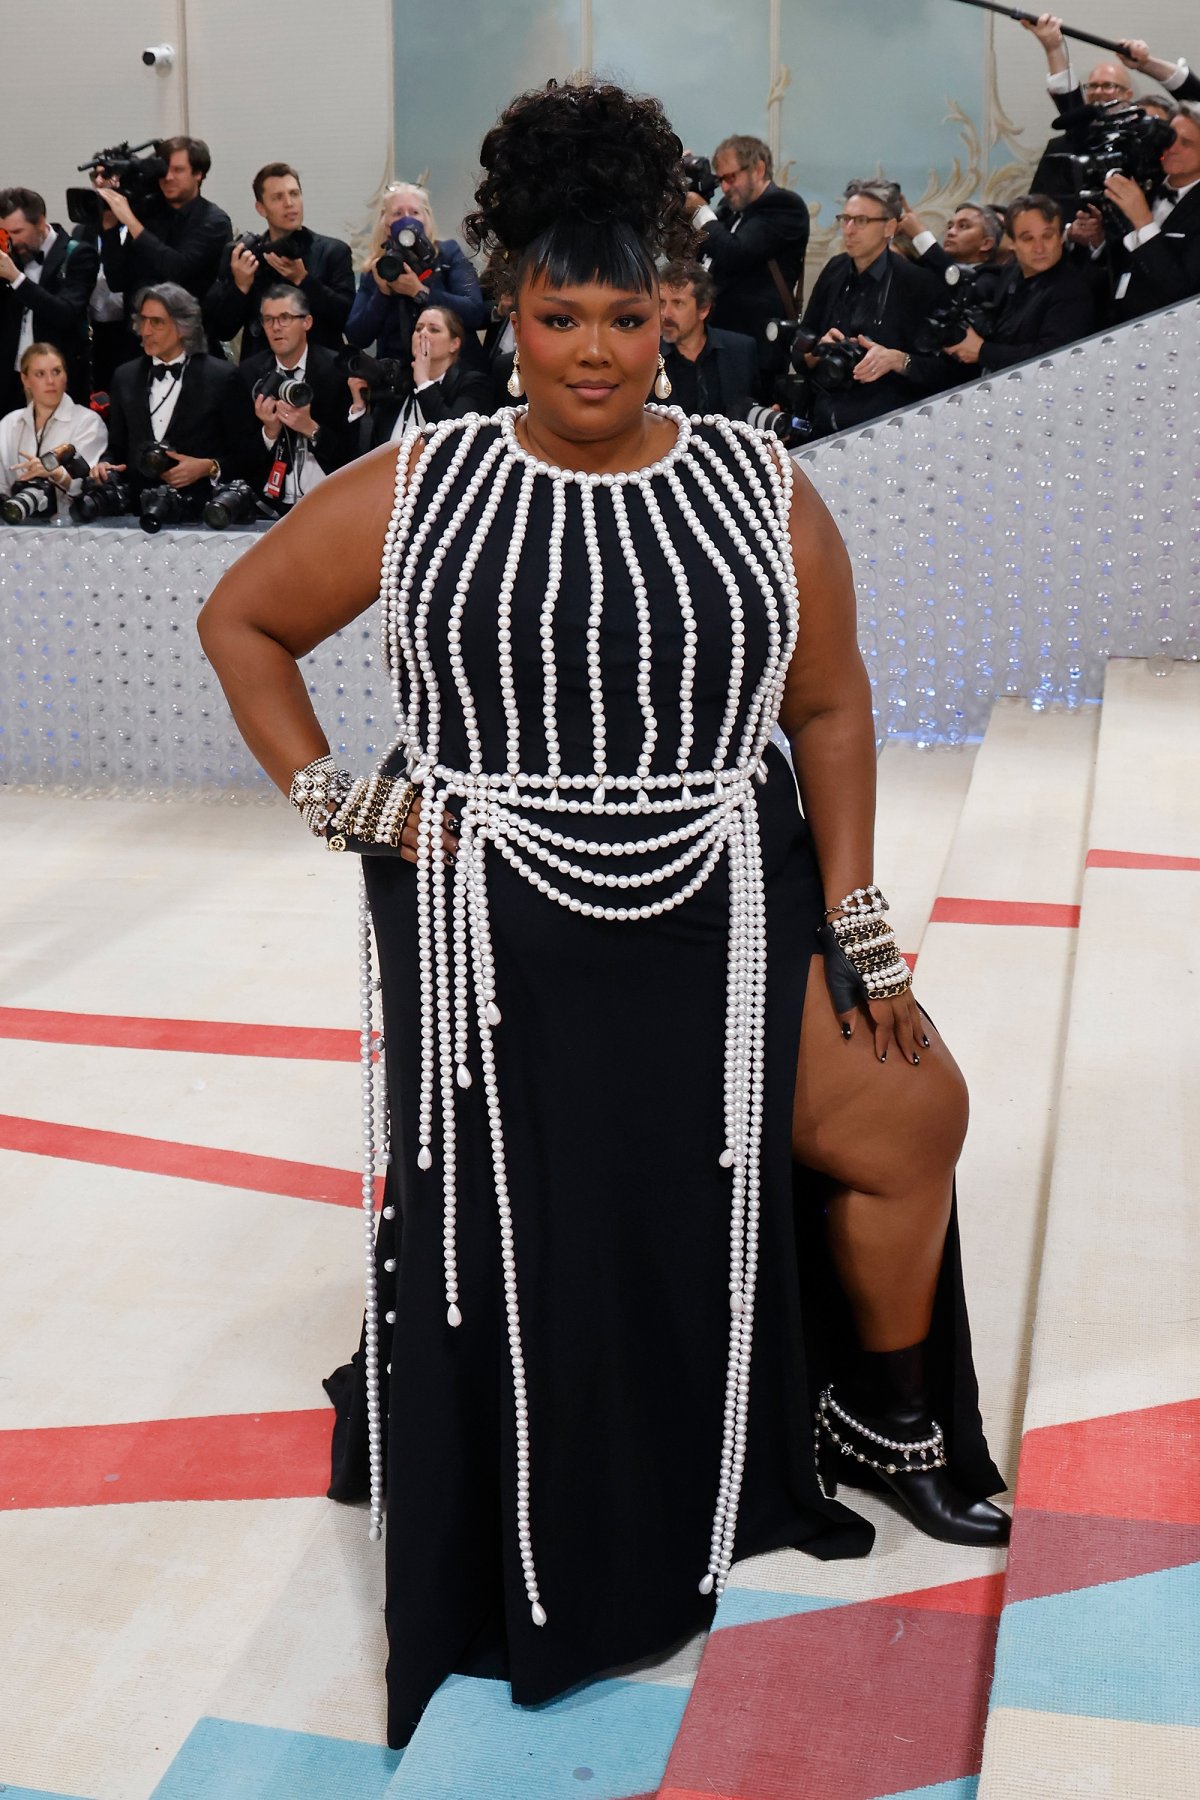 Why Does Lizzo Always Have to Call Out Fatphobia at the 2023 Met Gala?